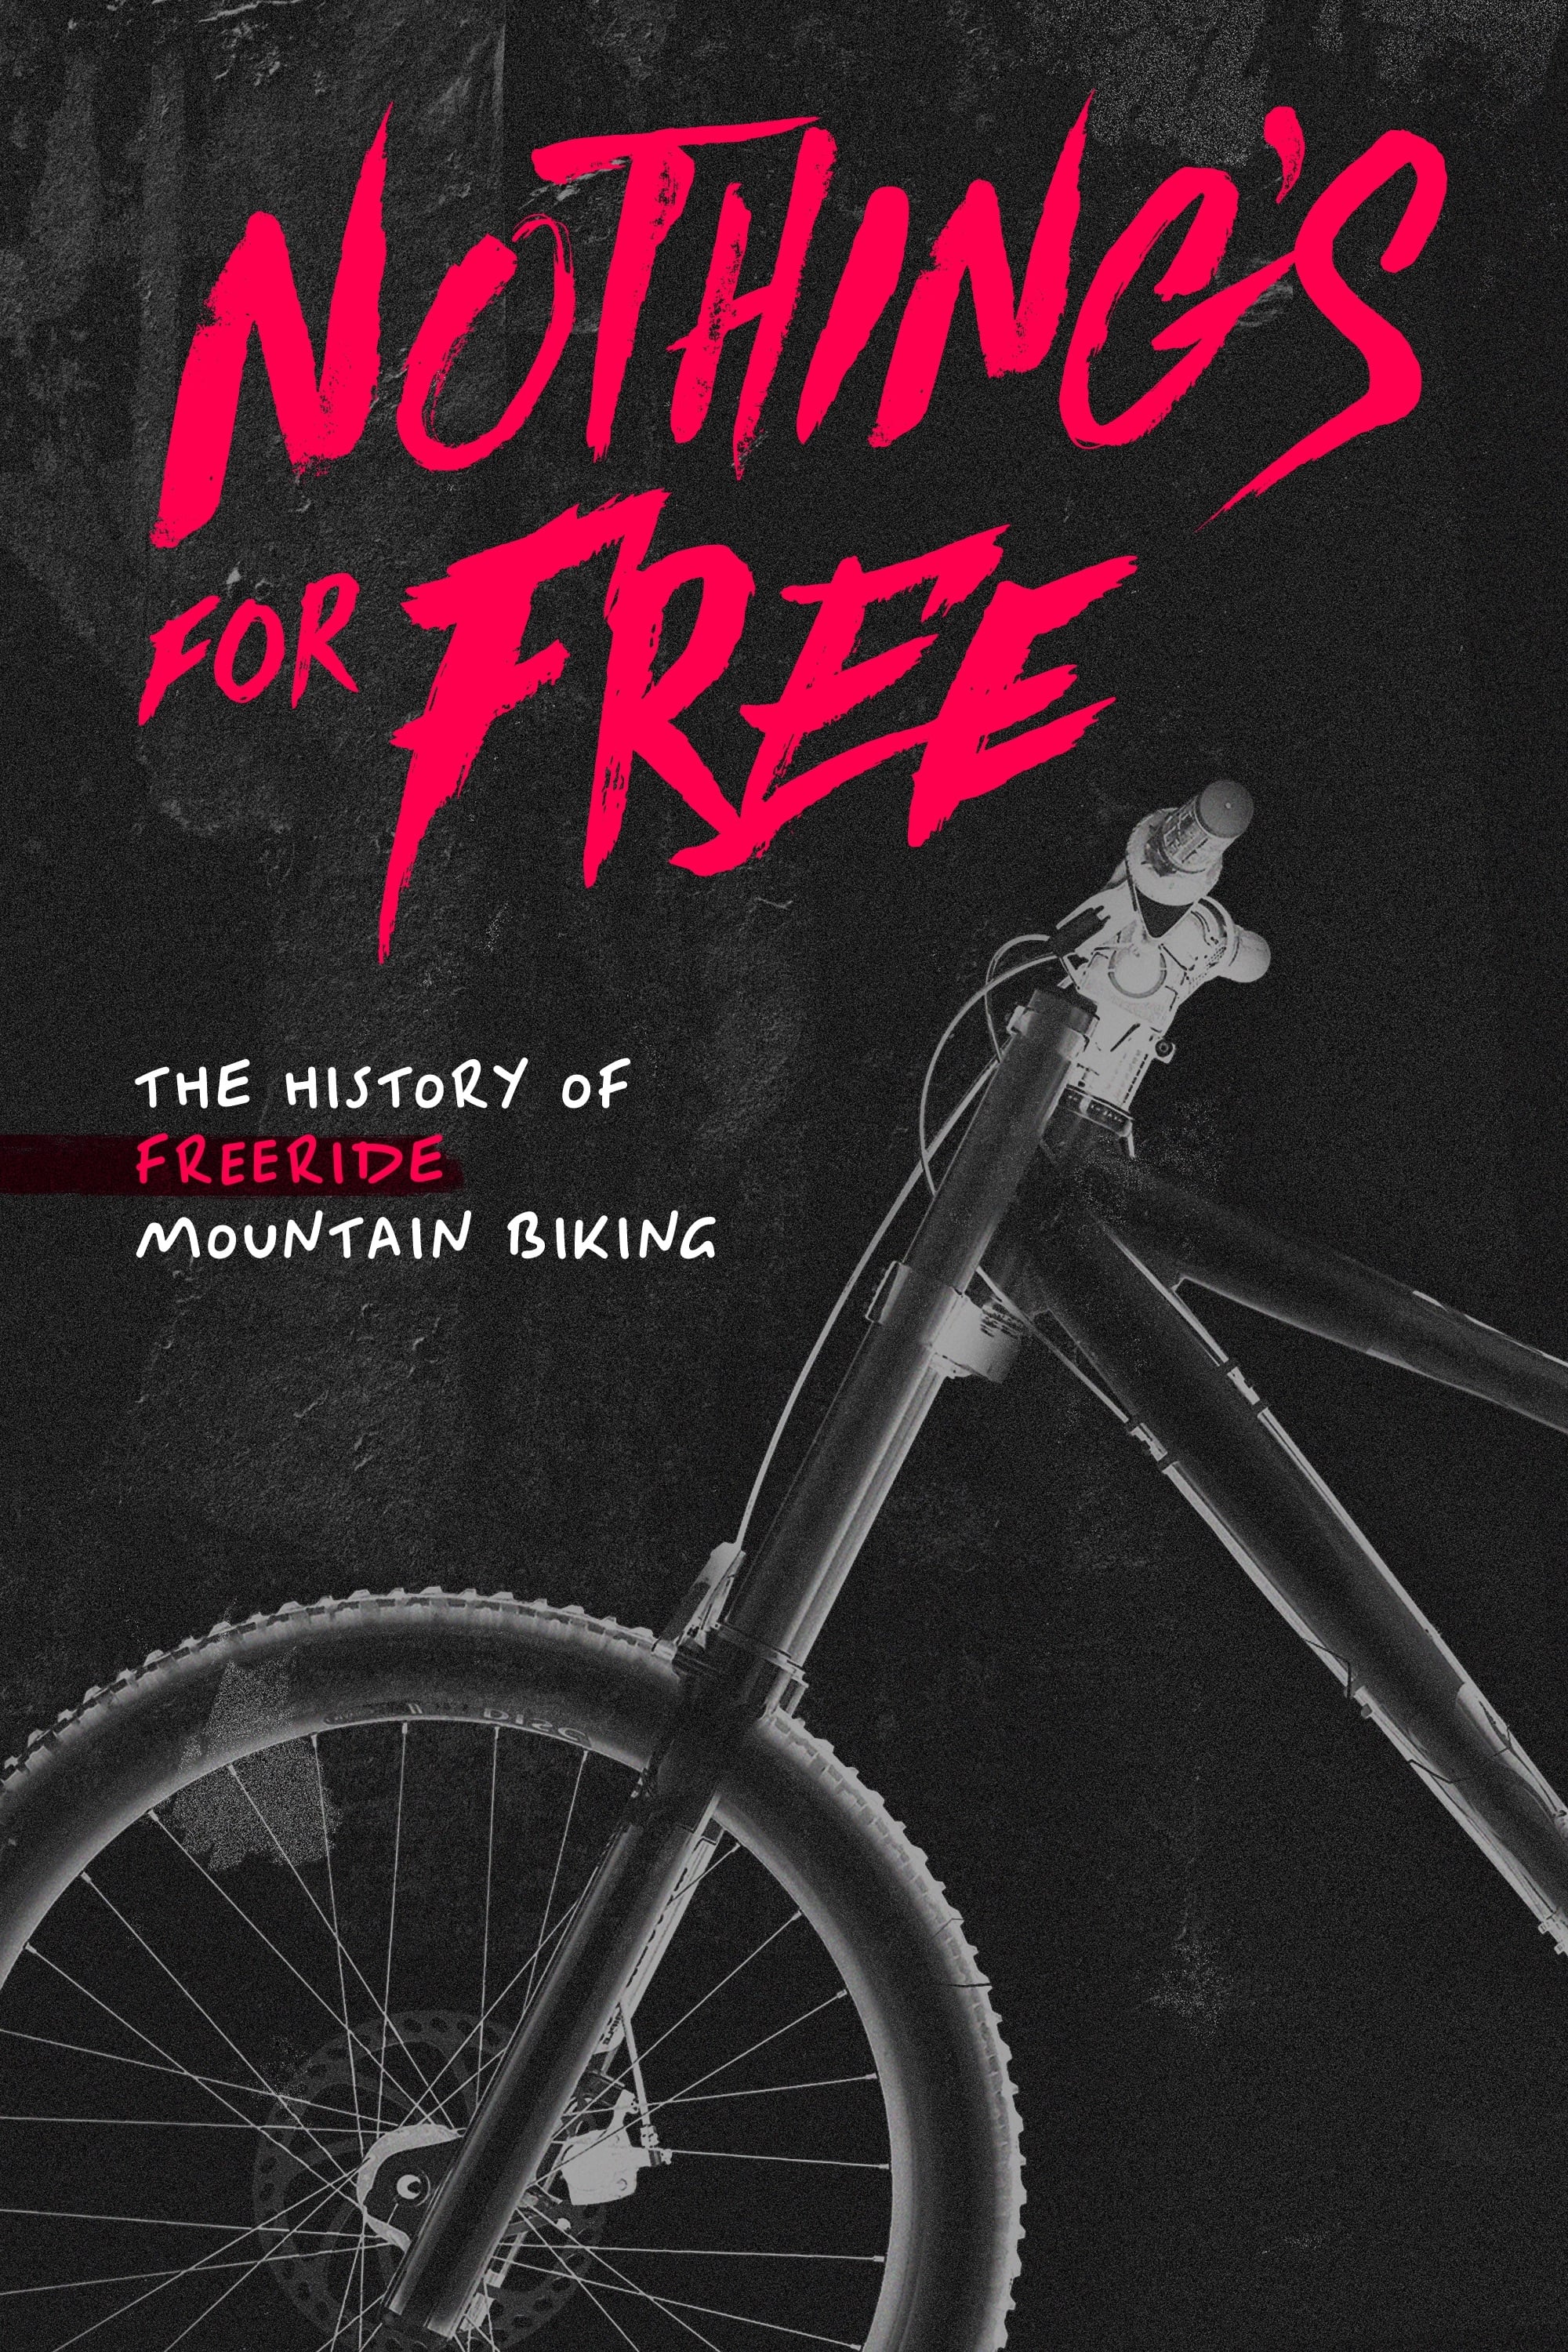 Nothing's for Free: The History of Freeride Mountain Biking